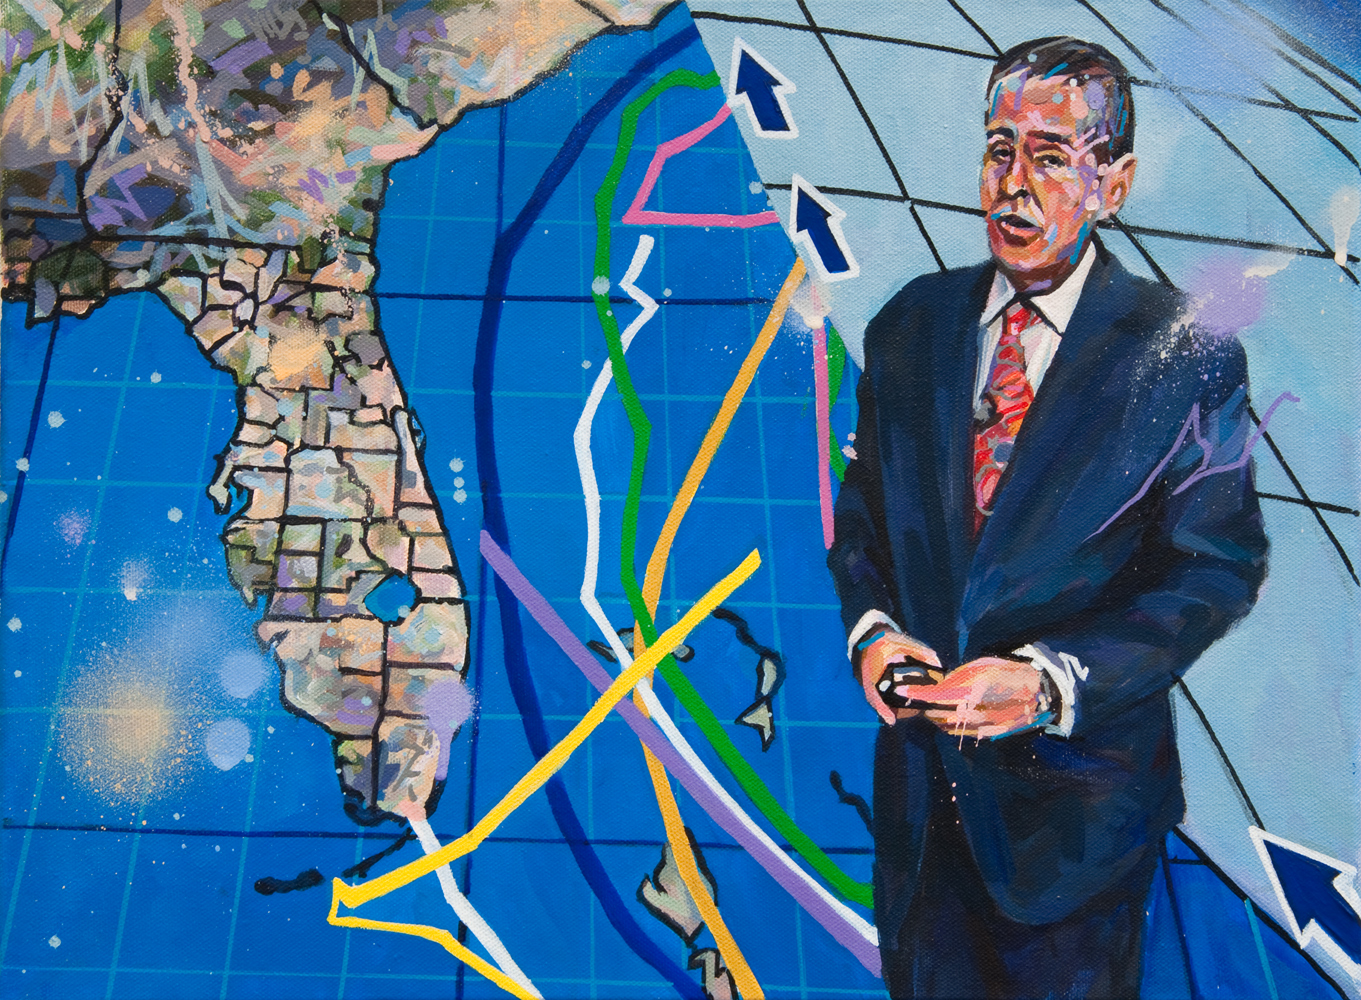  Michael Vasquez "Special Weather Report - Ch 7" acrylic and acrylic spray paint on canvas 12 x 16" 